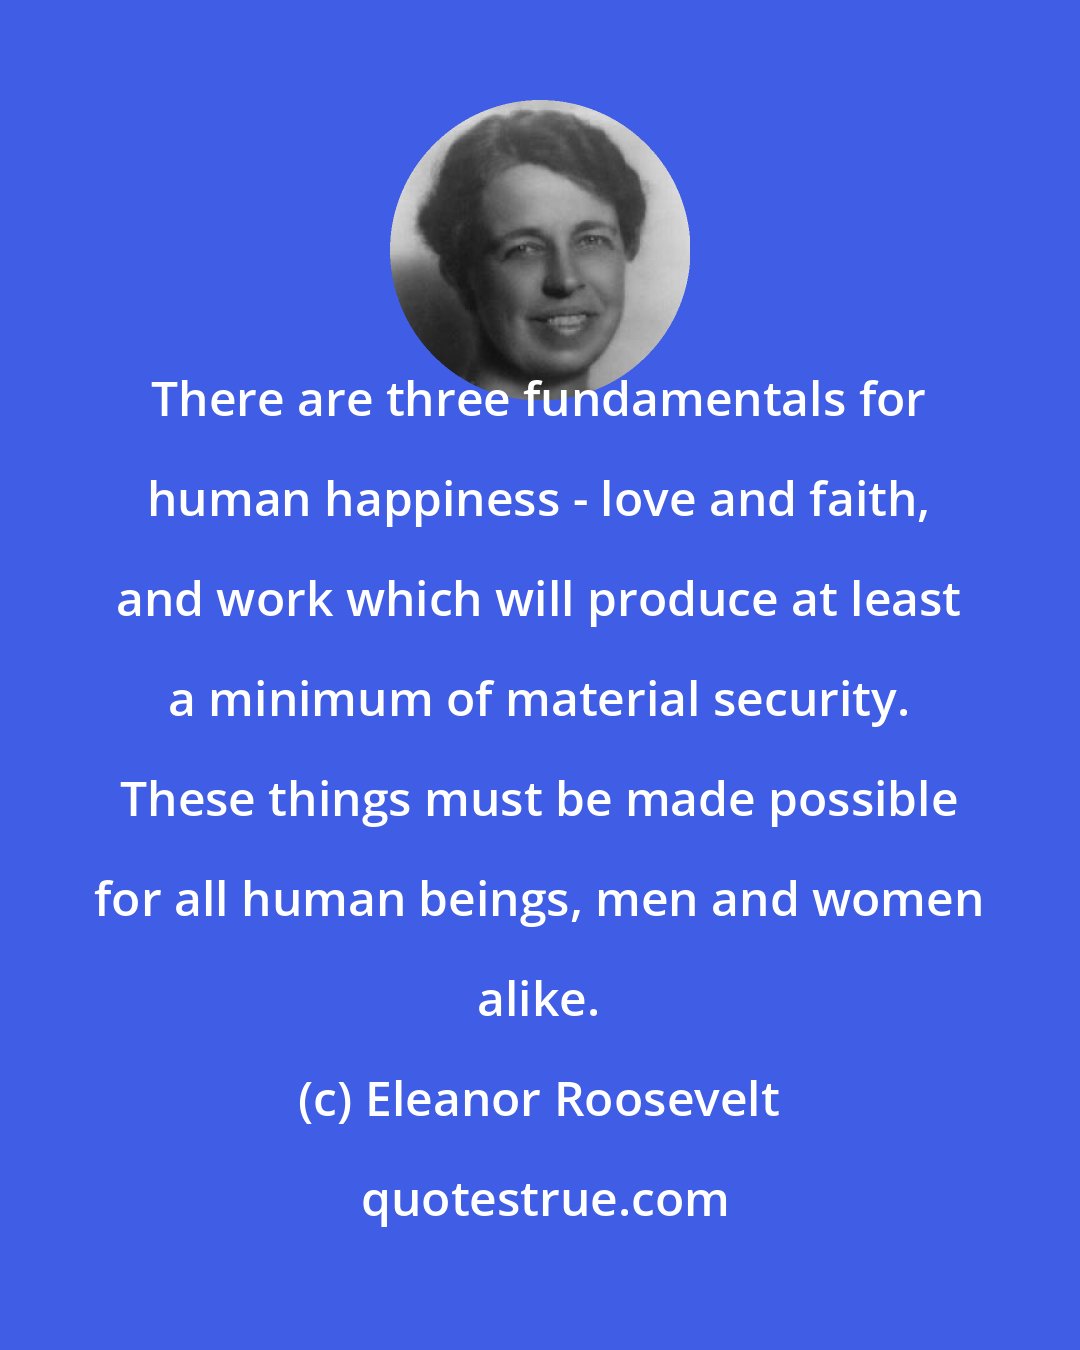 Eleanor Roosevelt: There are three fundamentals for human happiness - love and faith, and work which will produce at least a minimum of material security. These things must be made possible for all human beings, men and women alike.